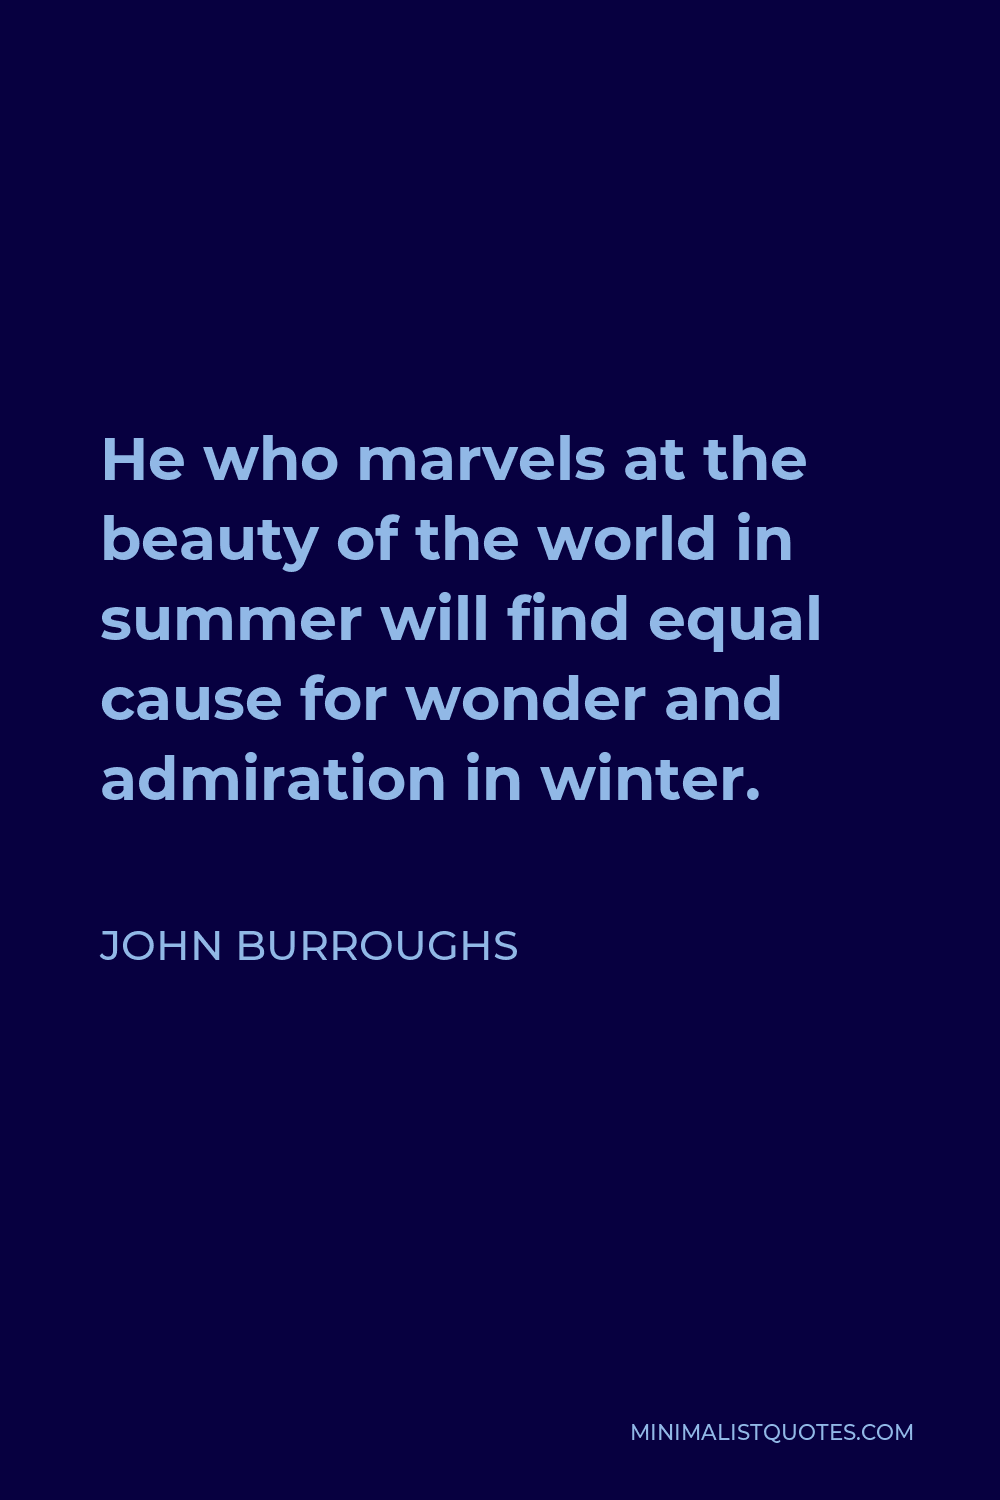 John Burroughs Quote - He who marvels at the beauty of the world in summer will find equal cause for wonder and admiration in winter.